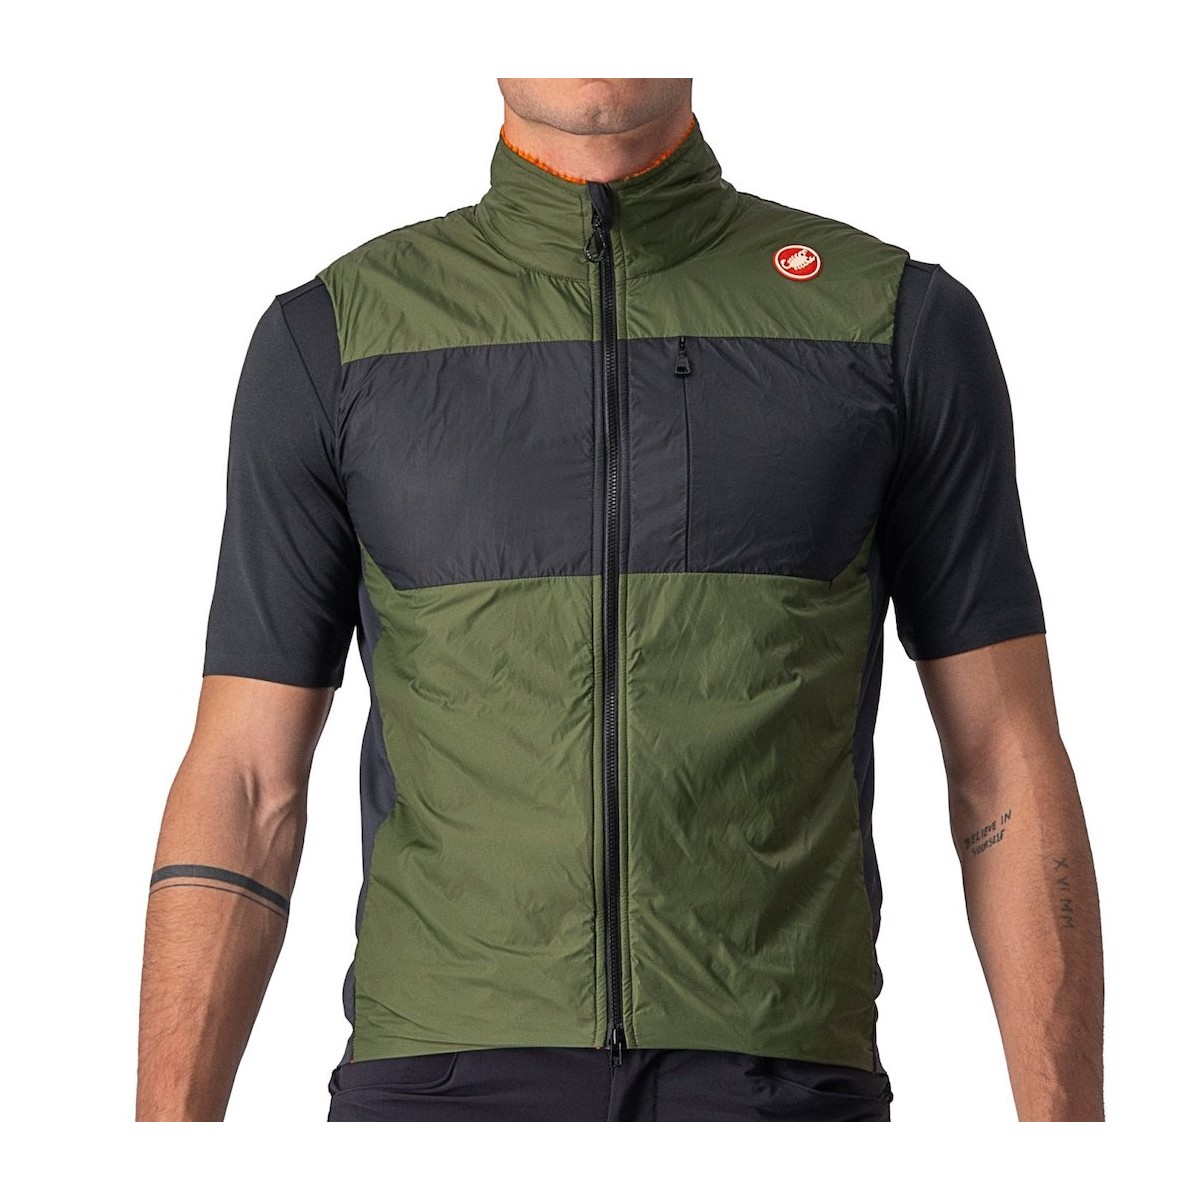 CASTELLI UNLIMITED PUFFY cycling vest - green